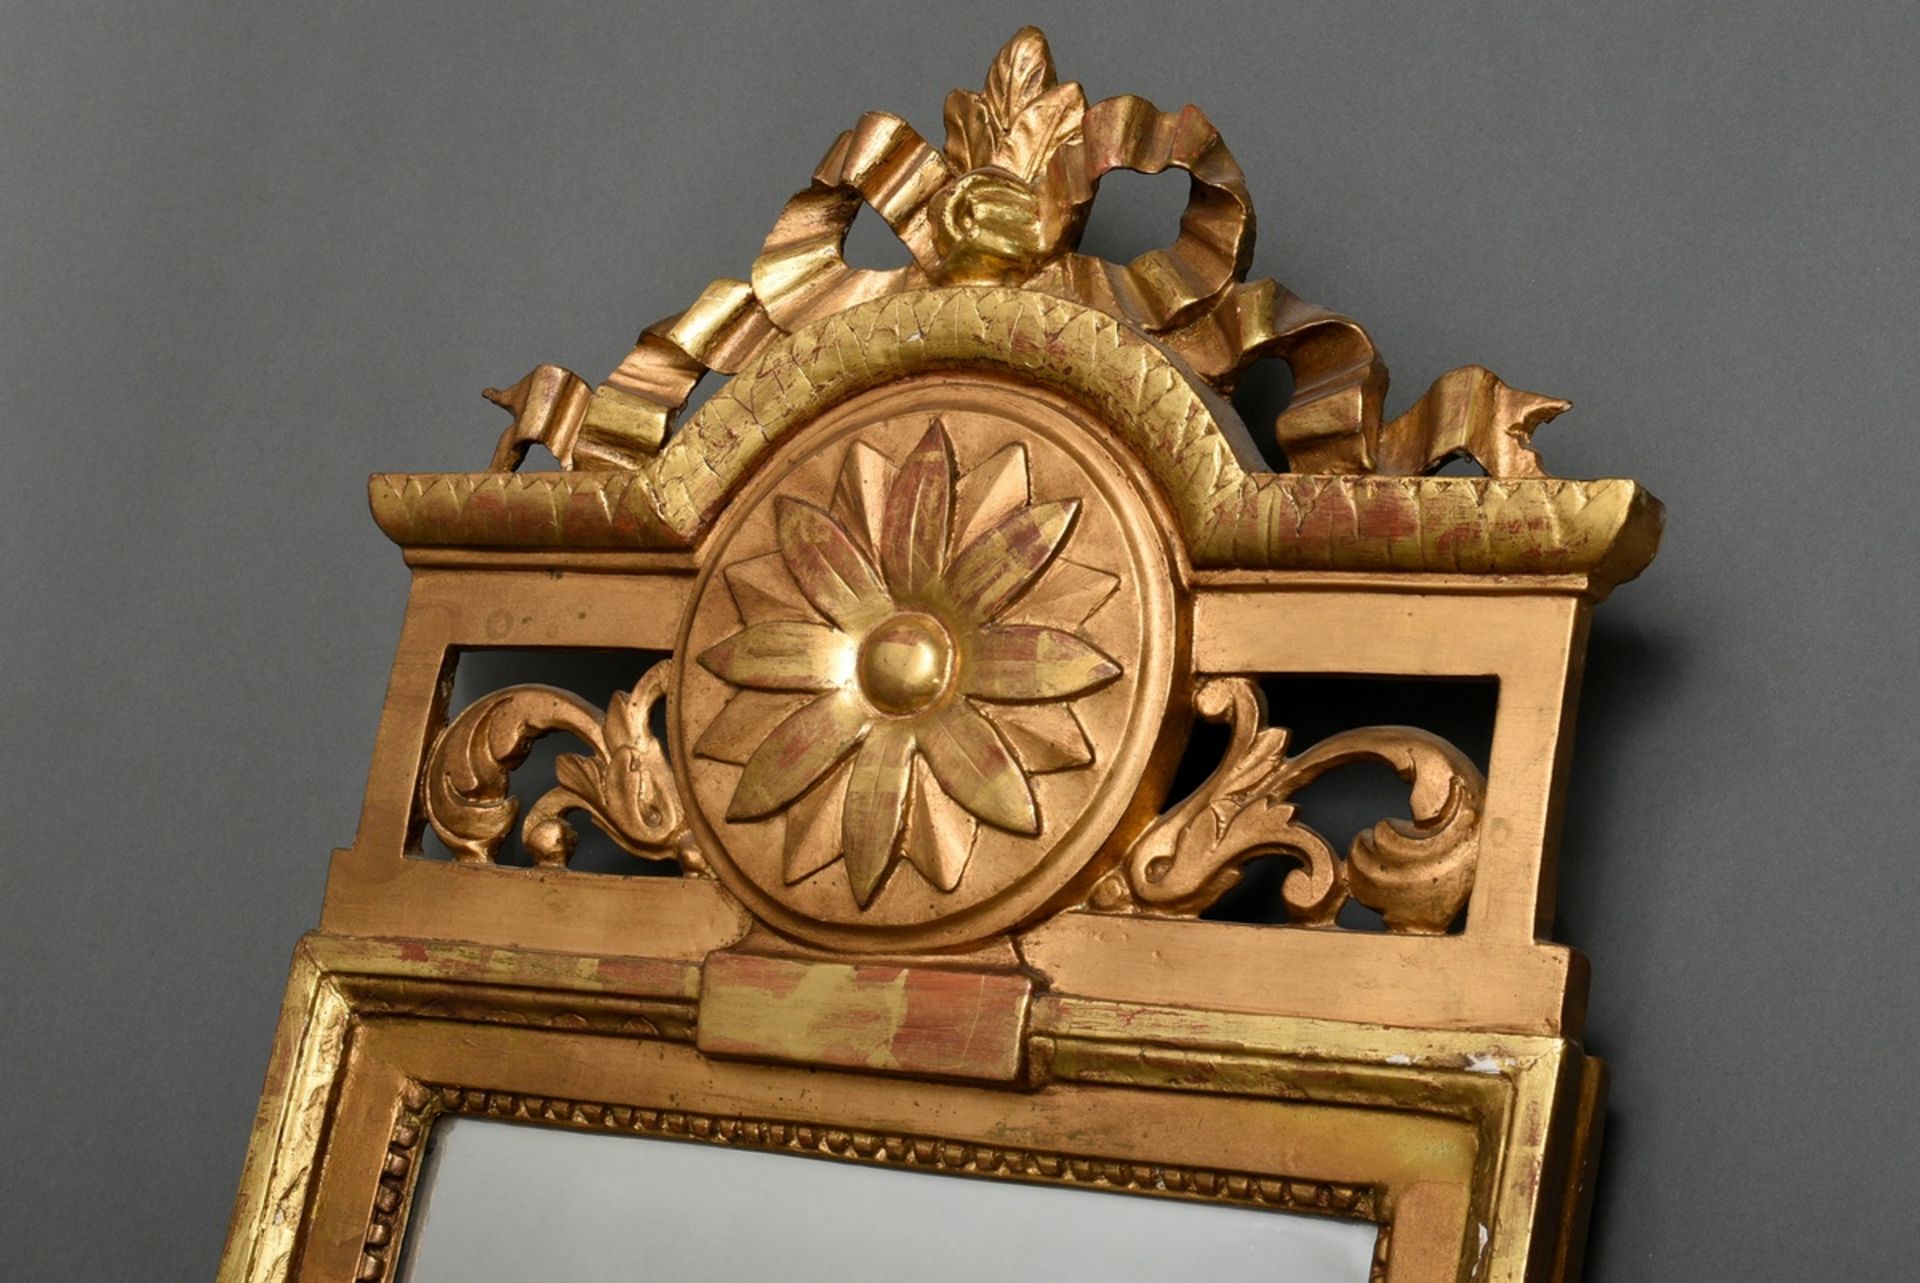 Louis XVI console mirror with rosette cartouche and bow finial as well as leaf hangings, c. 1780, c - Image 3 of 6